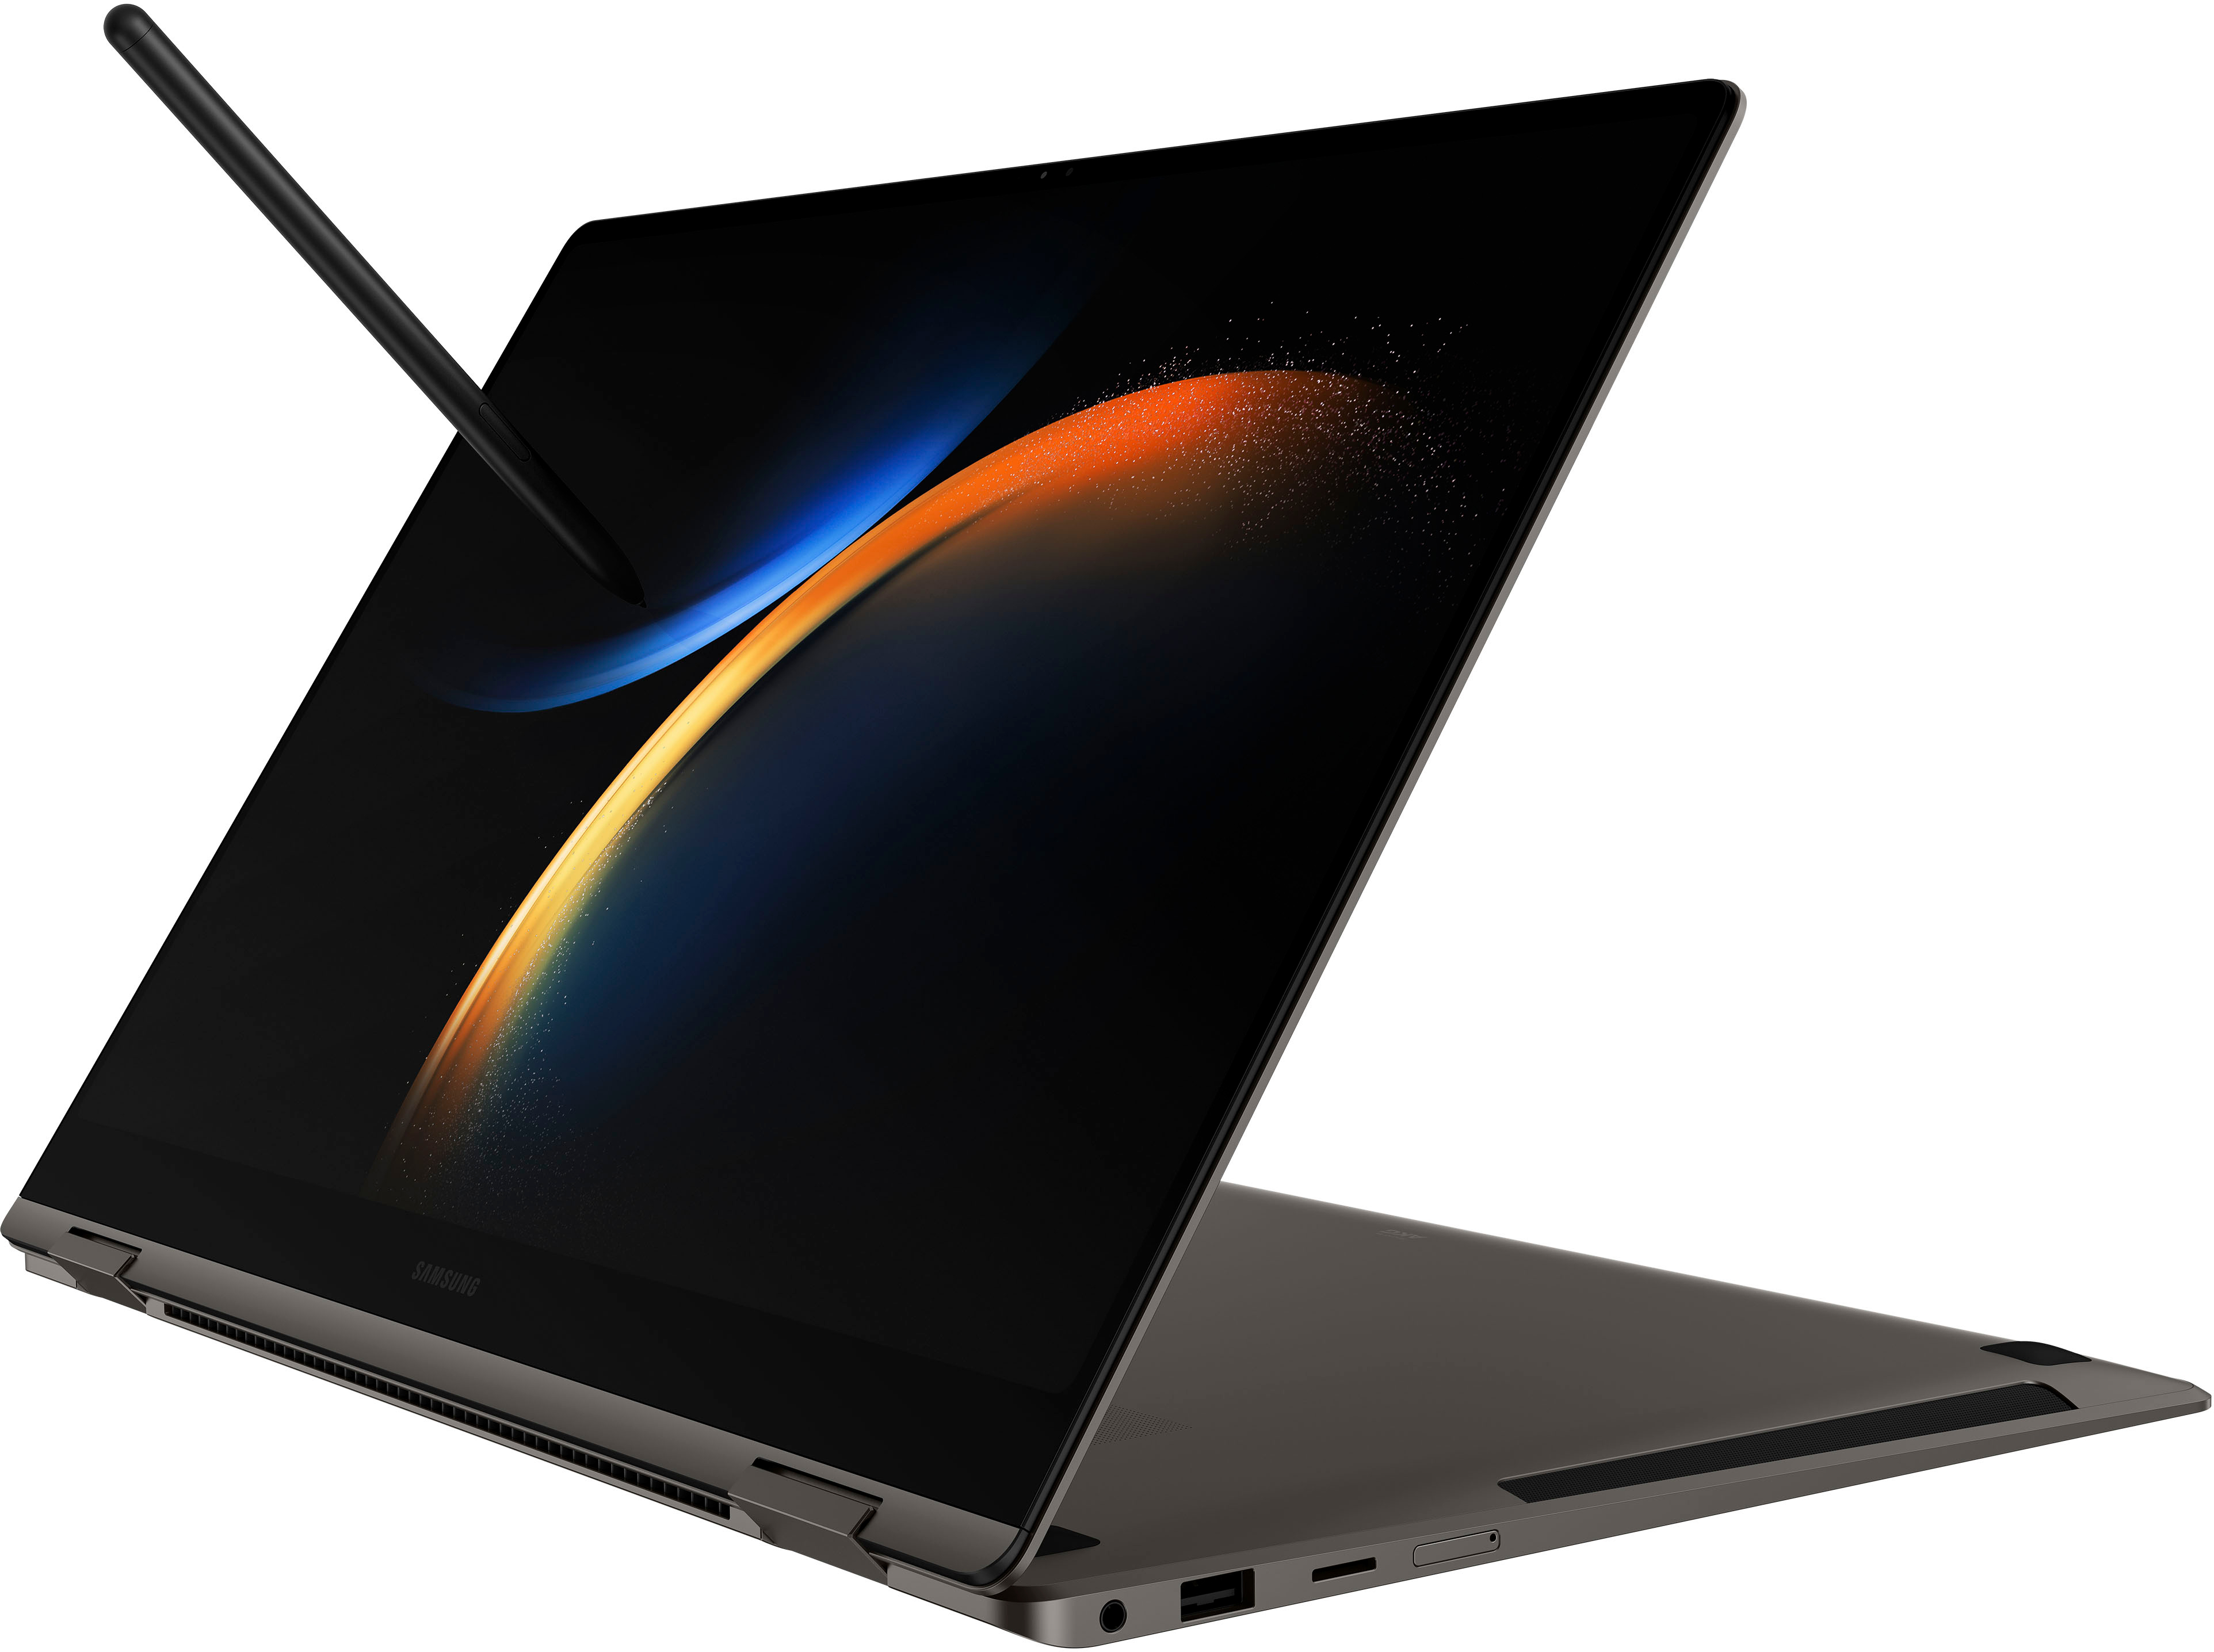 Samsung Galaxy Book3 Pro is more flexible than MacBook Air. But it's not as  solid